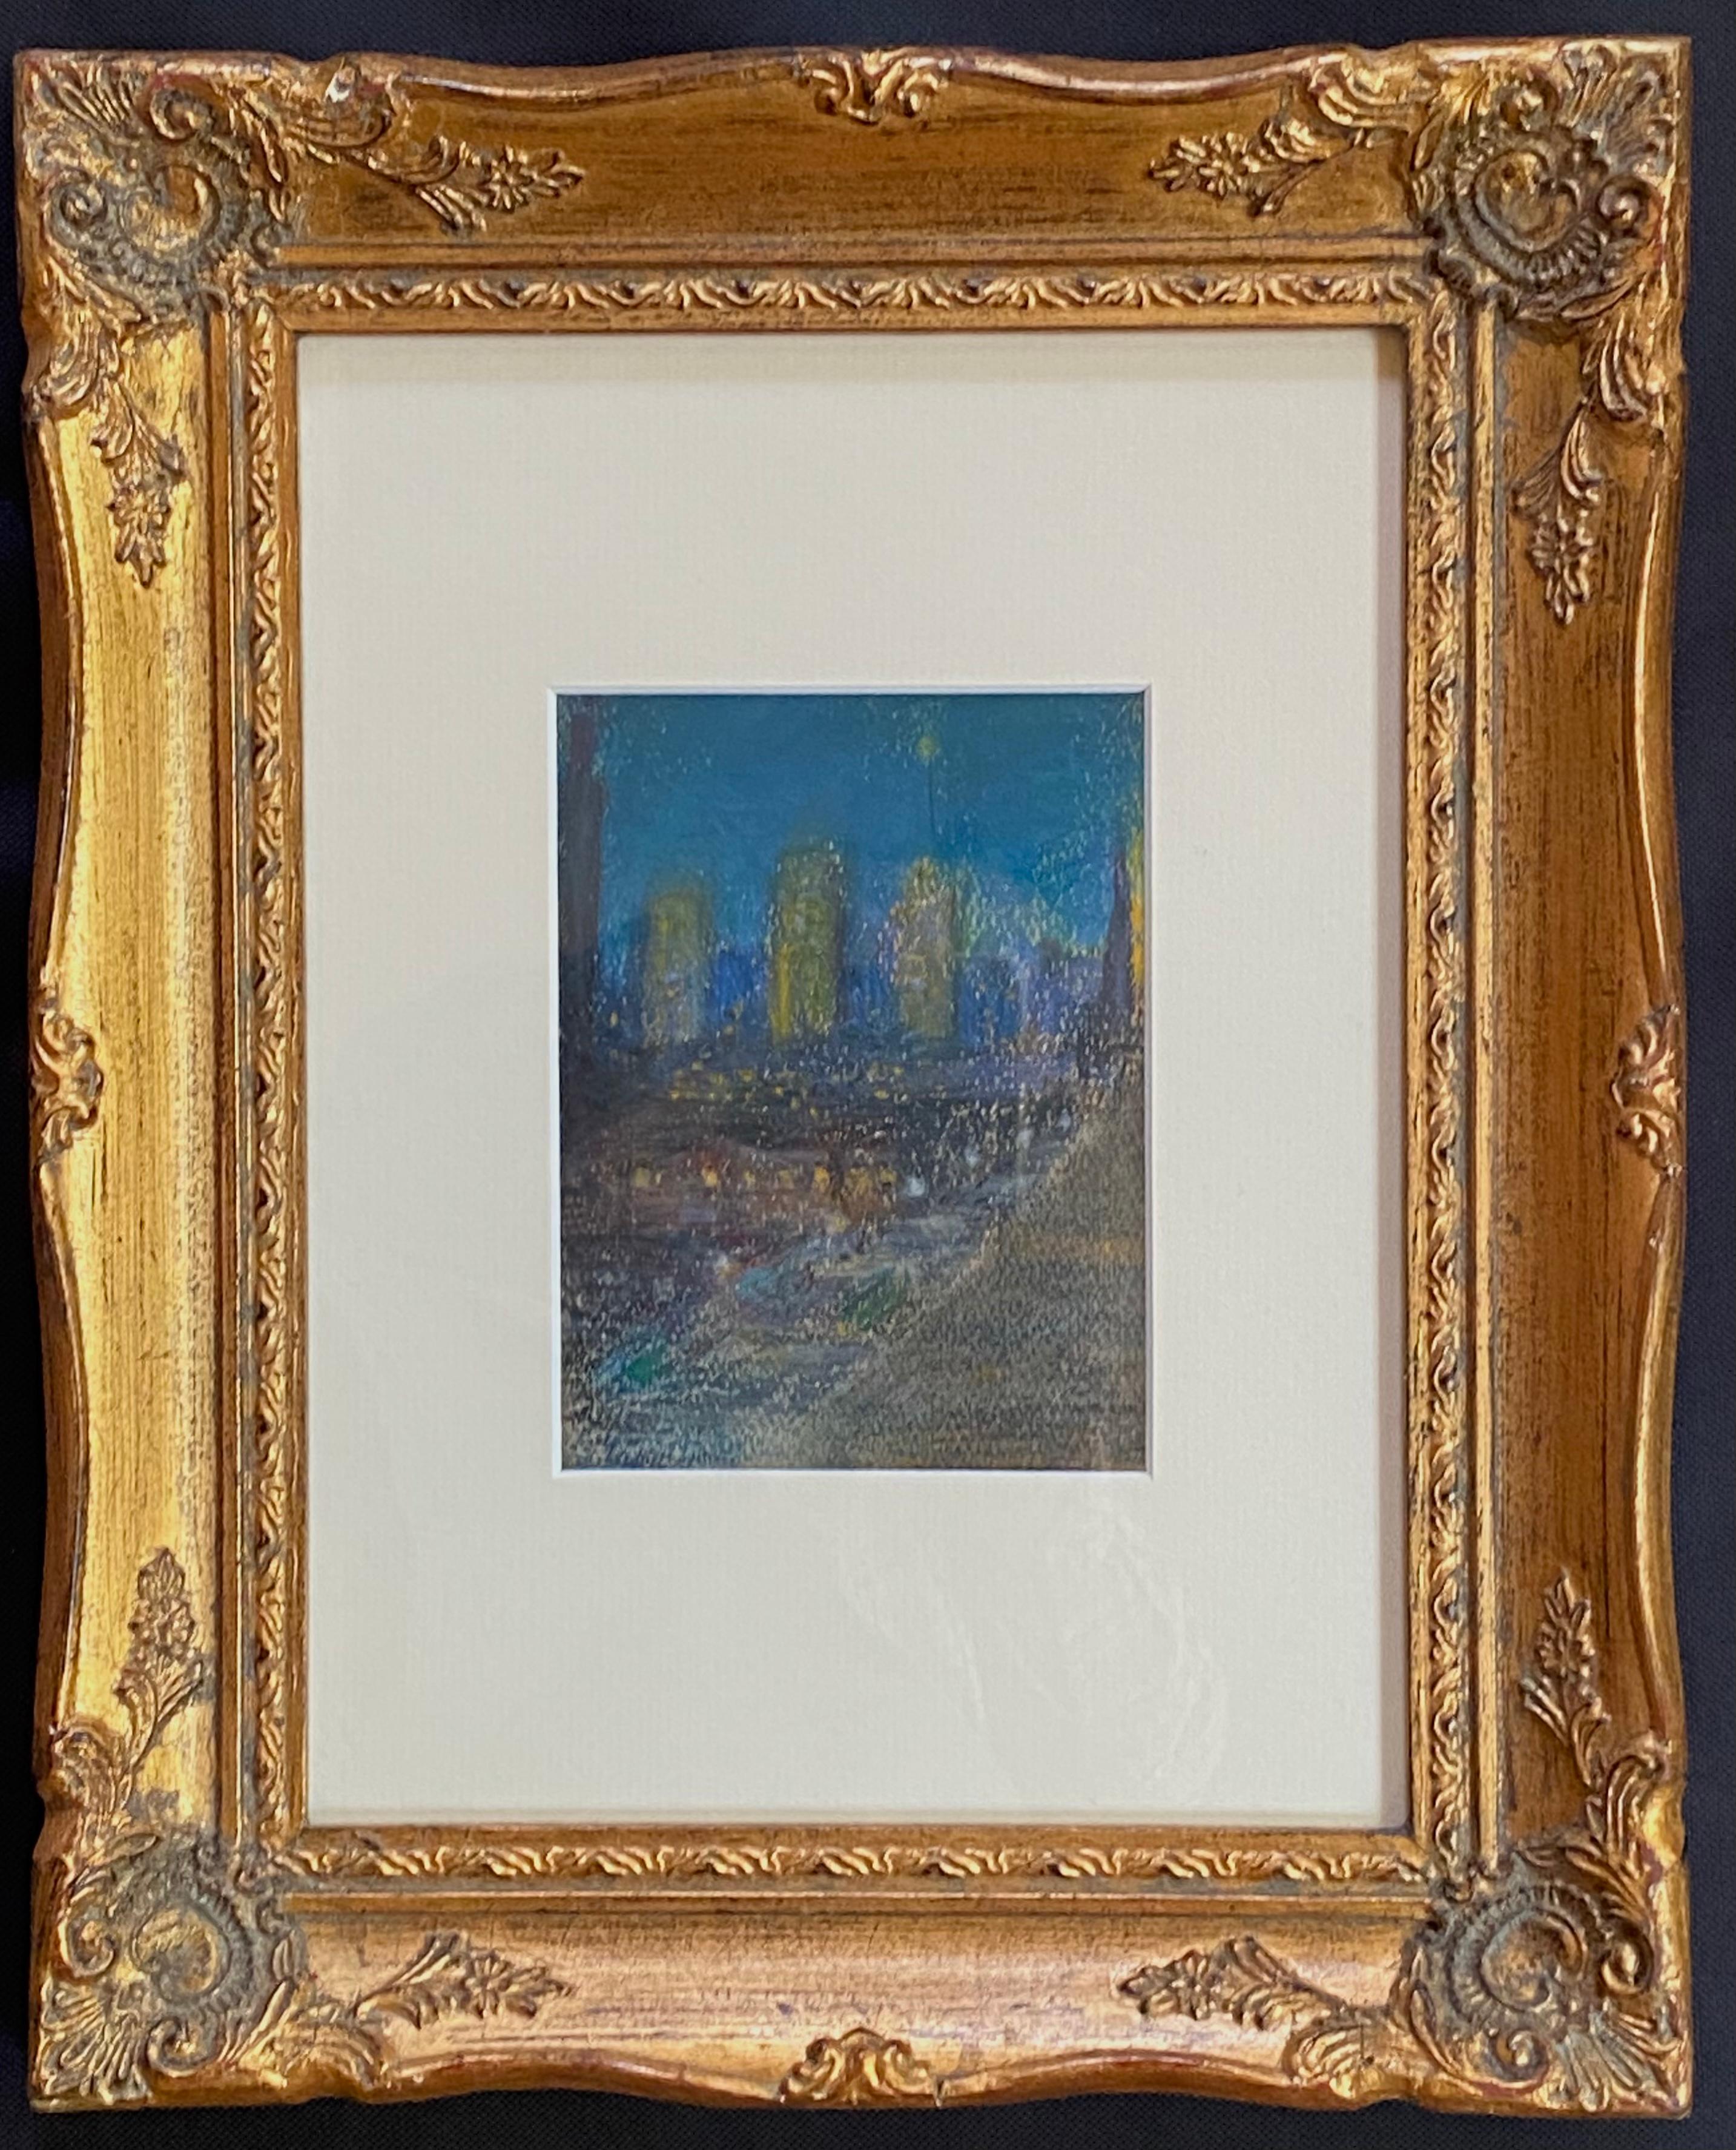 Circa 1920 original pastel on paper of a twilight view of New York City from the East River by George Gardner Symons.. Signed lower left. Condition is good. Minor loses; old tape verso. Signed verso as well. Framed in a vintage gold leaf frame.